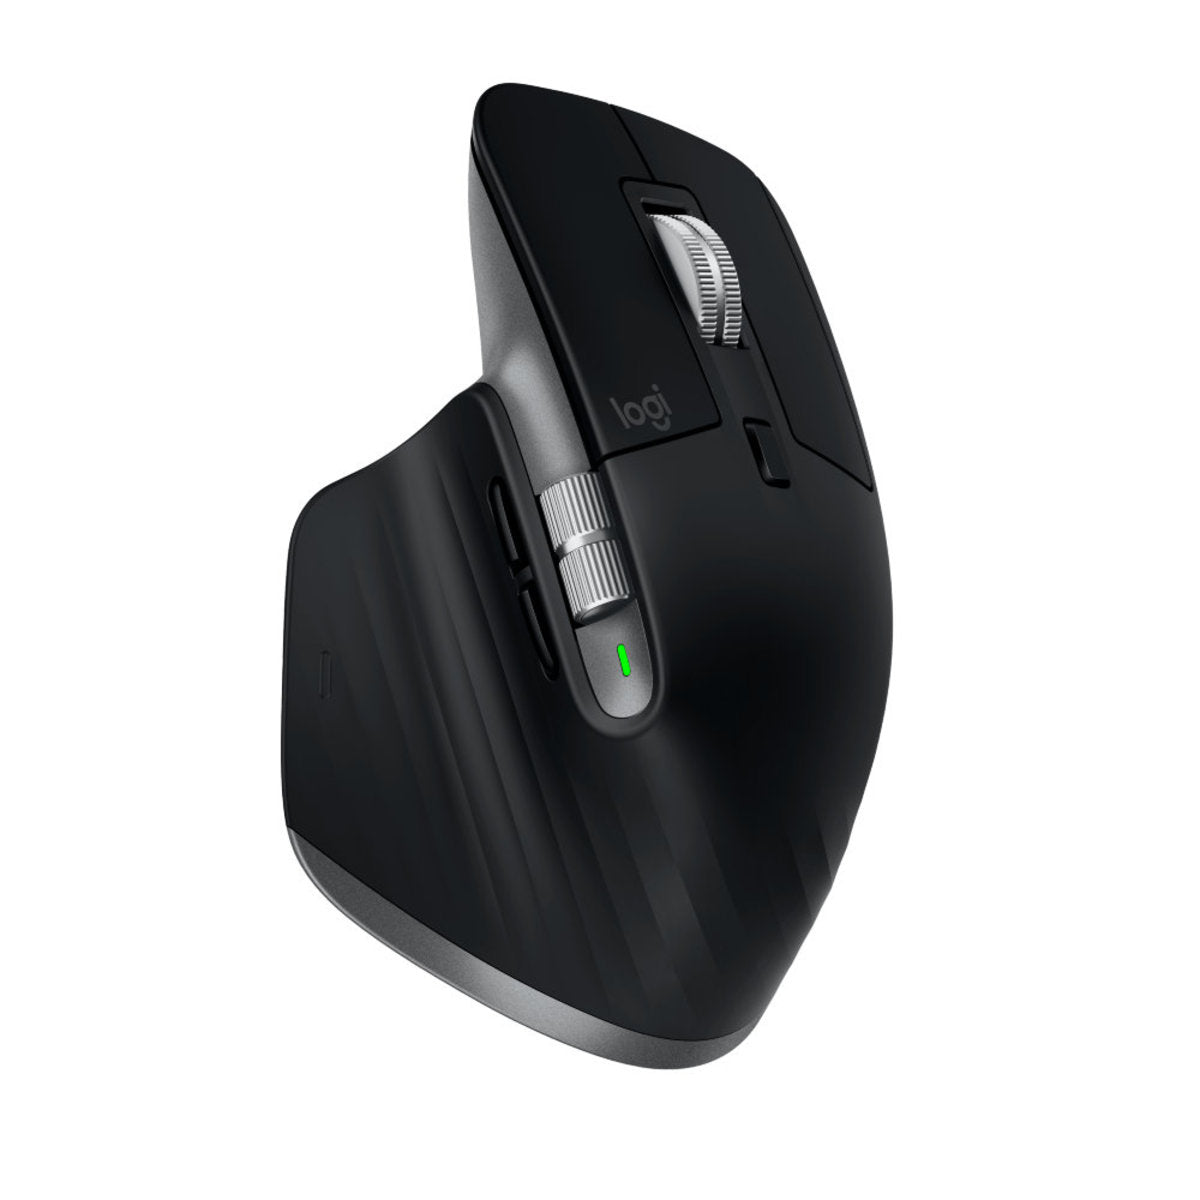 MX MASTER 3 For MAC High Performance Wireless Mouse